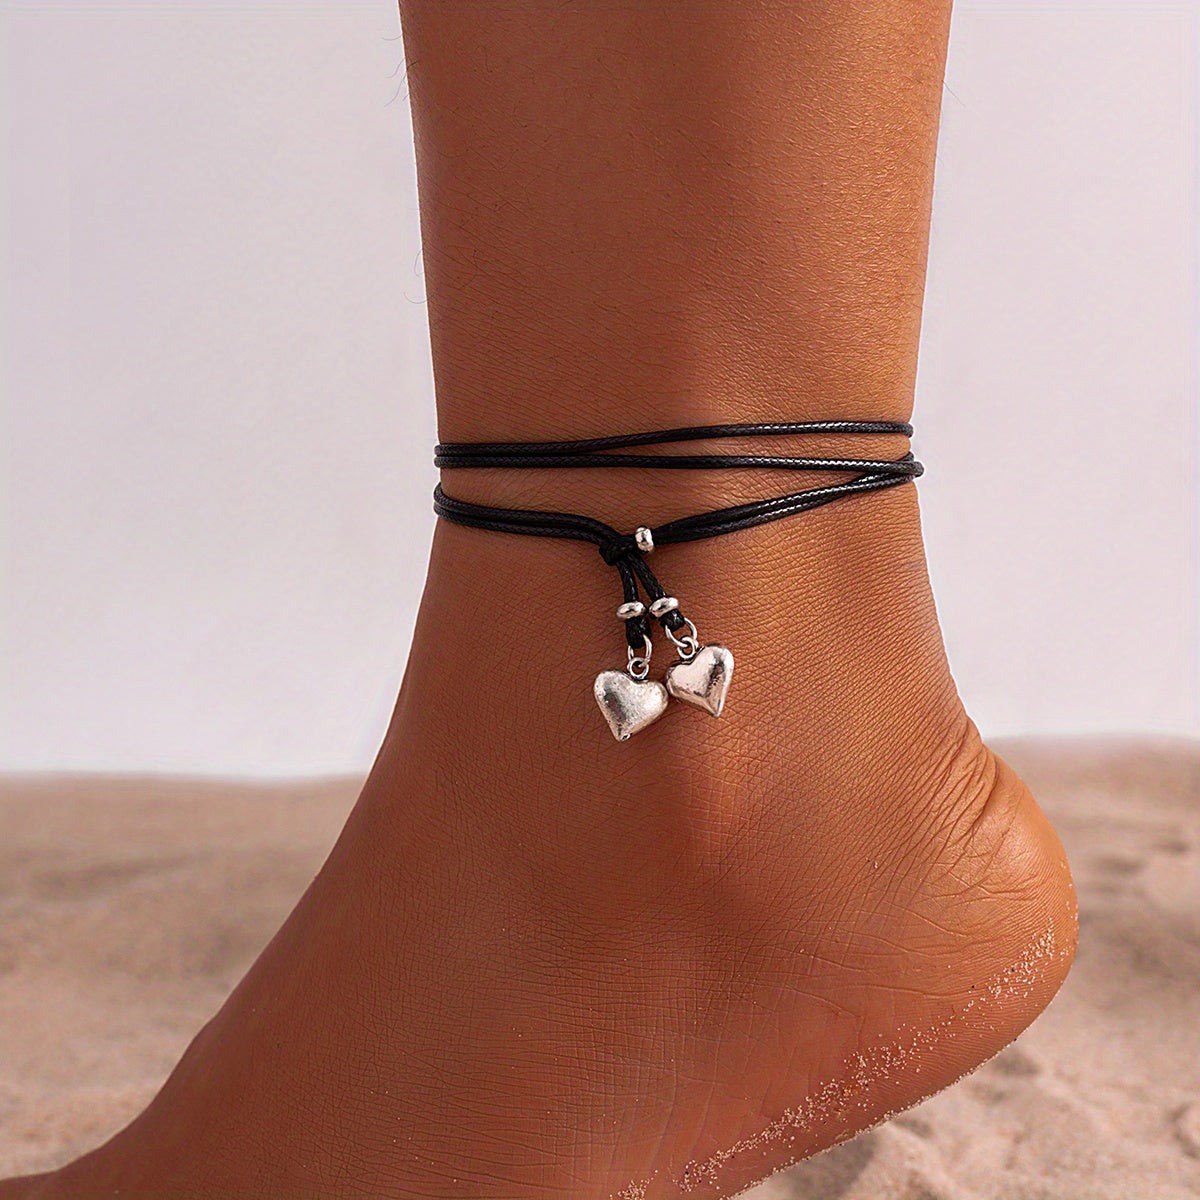 Lovely Double Heart Anklet: Waterproof & Stylish for Every Occasion!